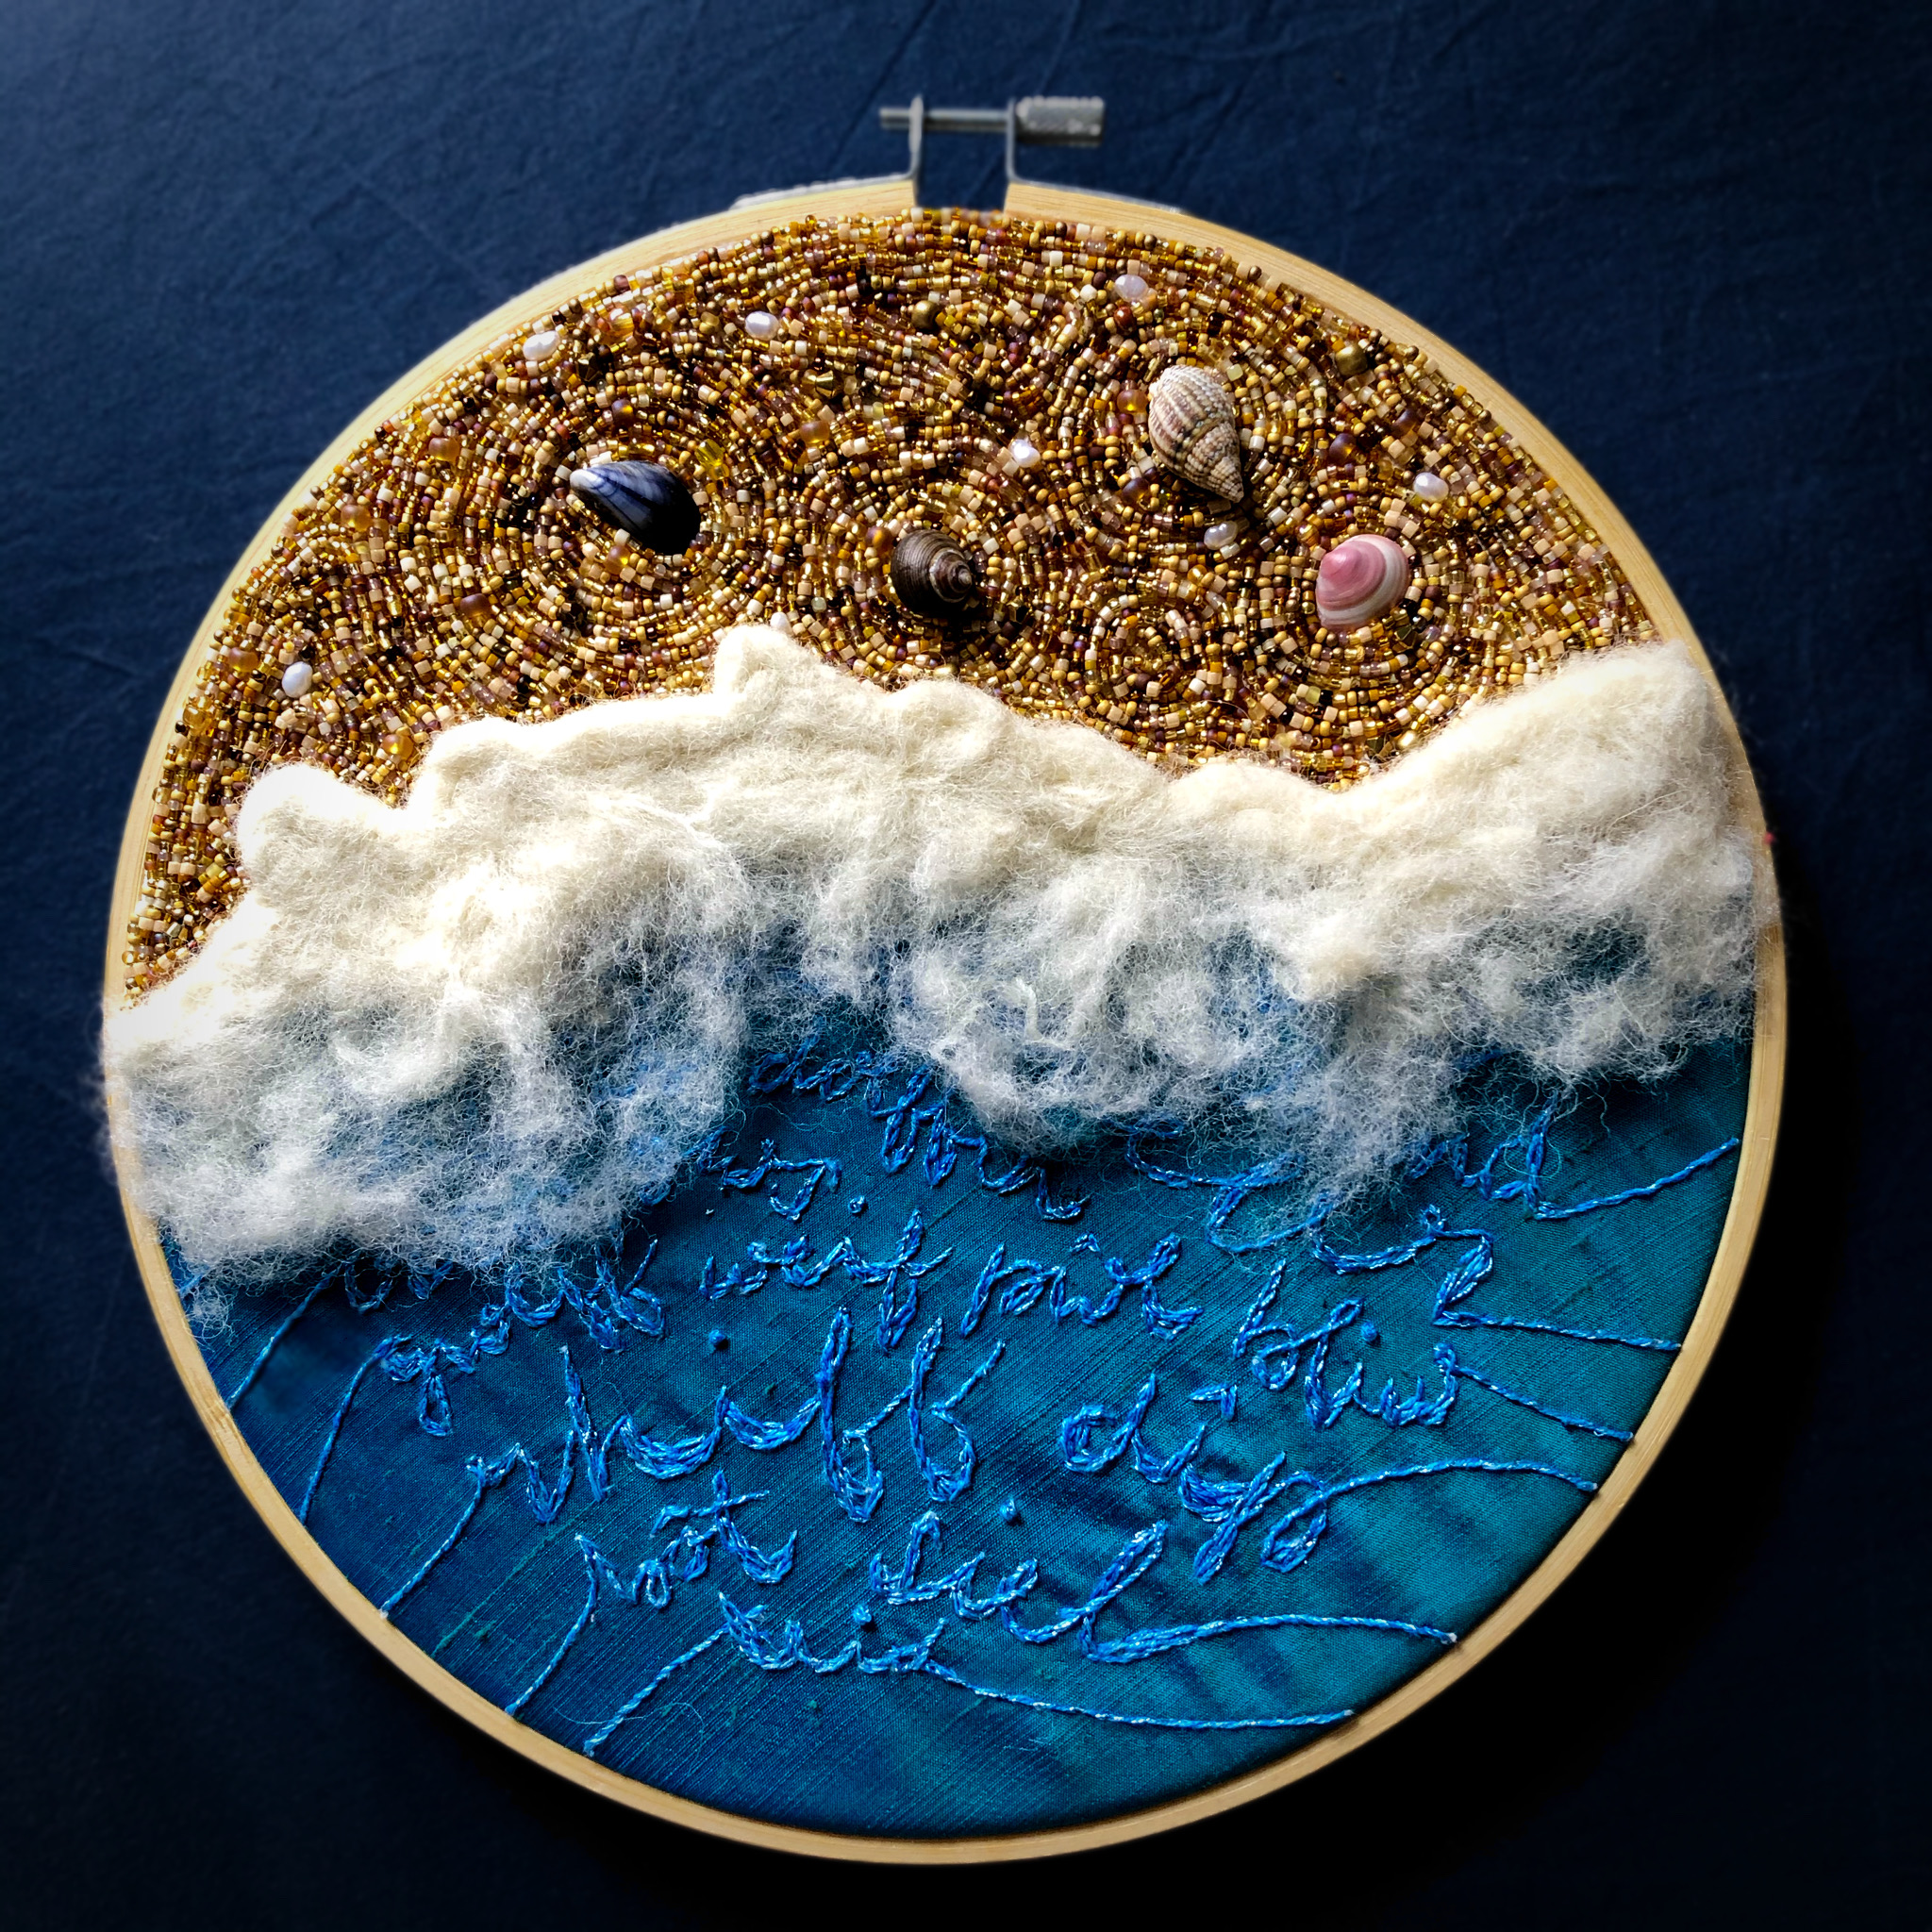 An embroidery hoop containing a representation of the sea washing over a sandy beach. The sand is composed of hundreds of glass and pearl beads. The sea is a piece of blue-green silk, upon which English loanwords into Welsh are embroidered.